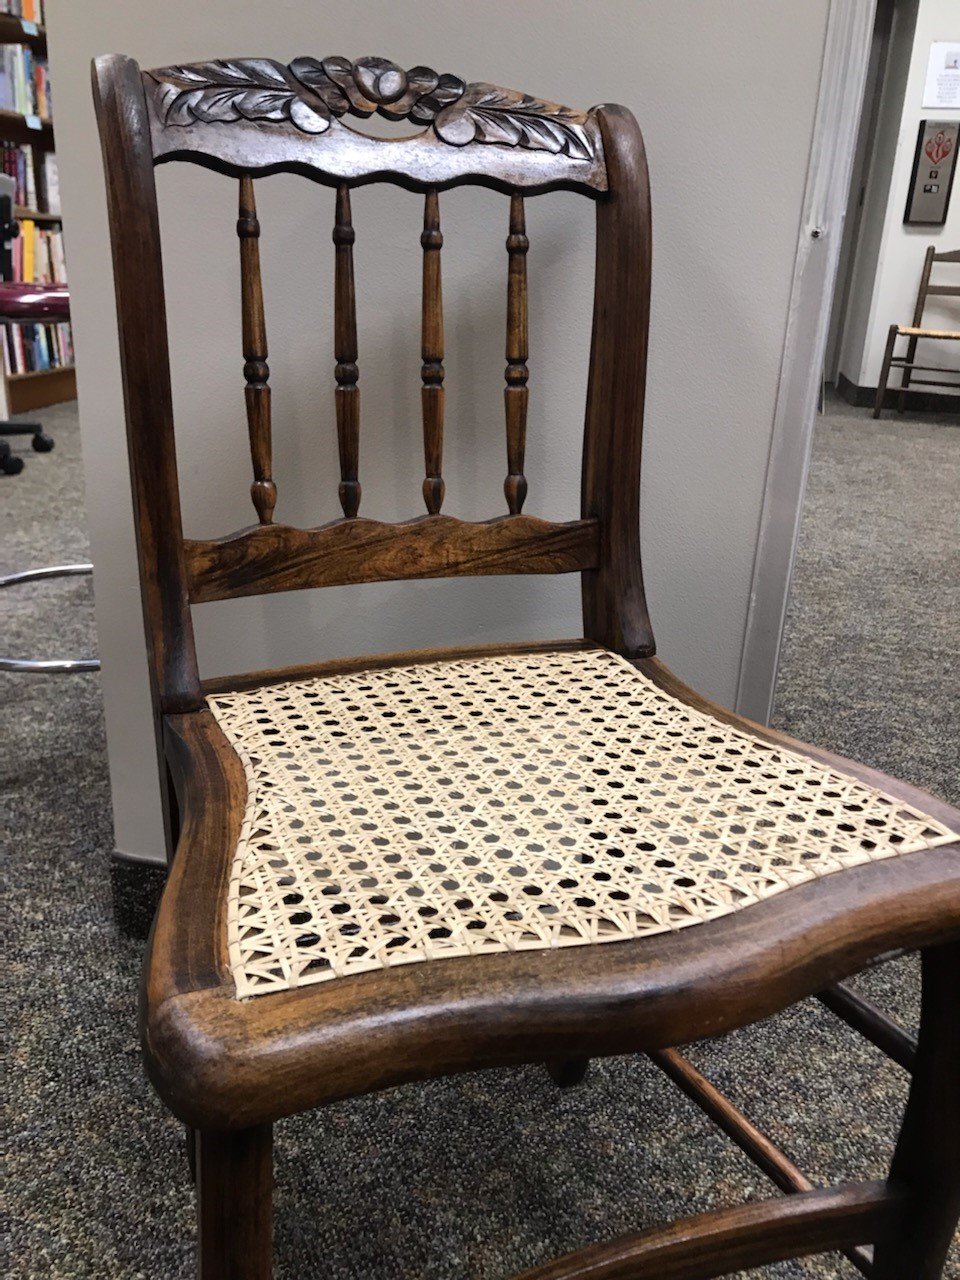 RESTORED FOR RAFFLE — A trio of accent chairs restored by the Library caners are one of four prizes up for raffle for the Canastota Public Library's "Show Your Home a Little Love" fundraiser. Tickets are on sale until Feb. 14.